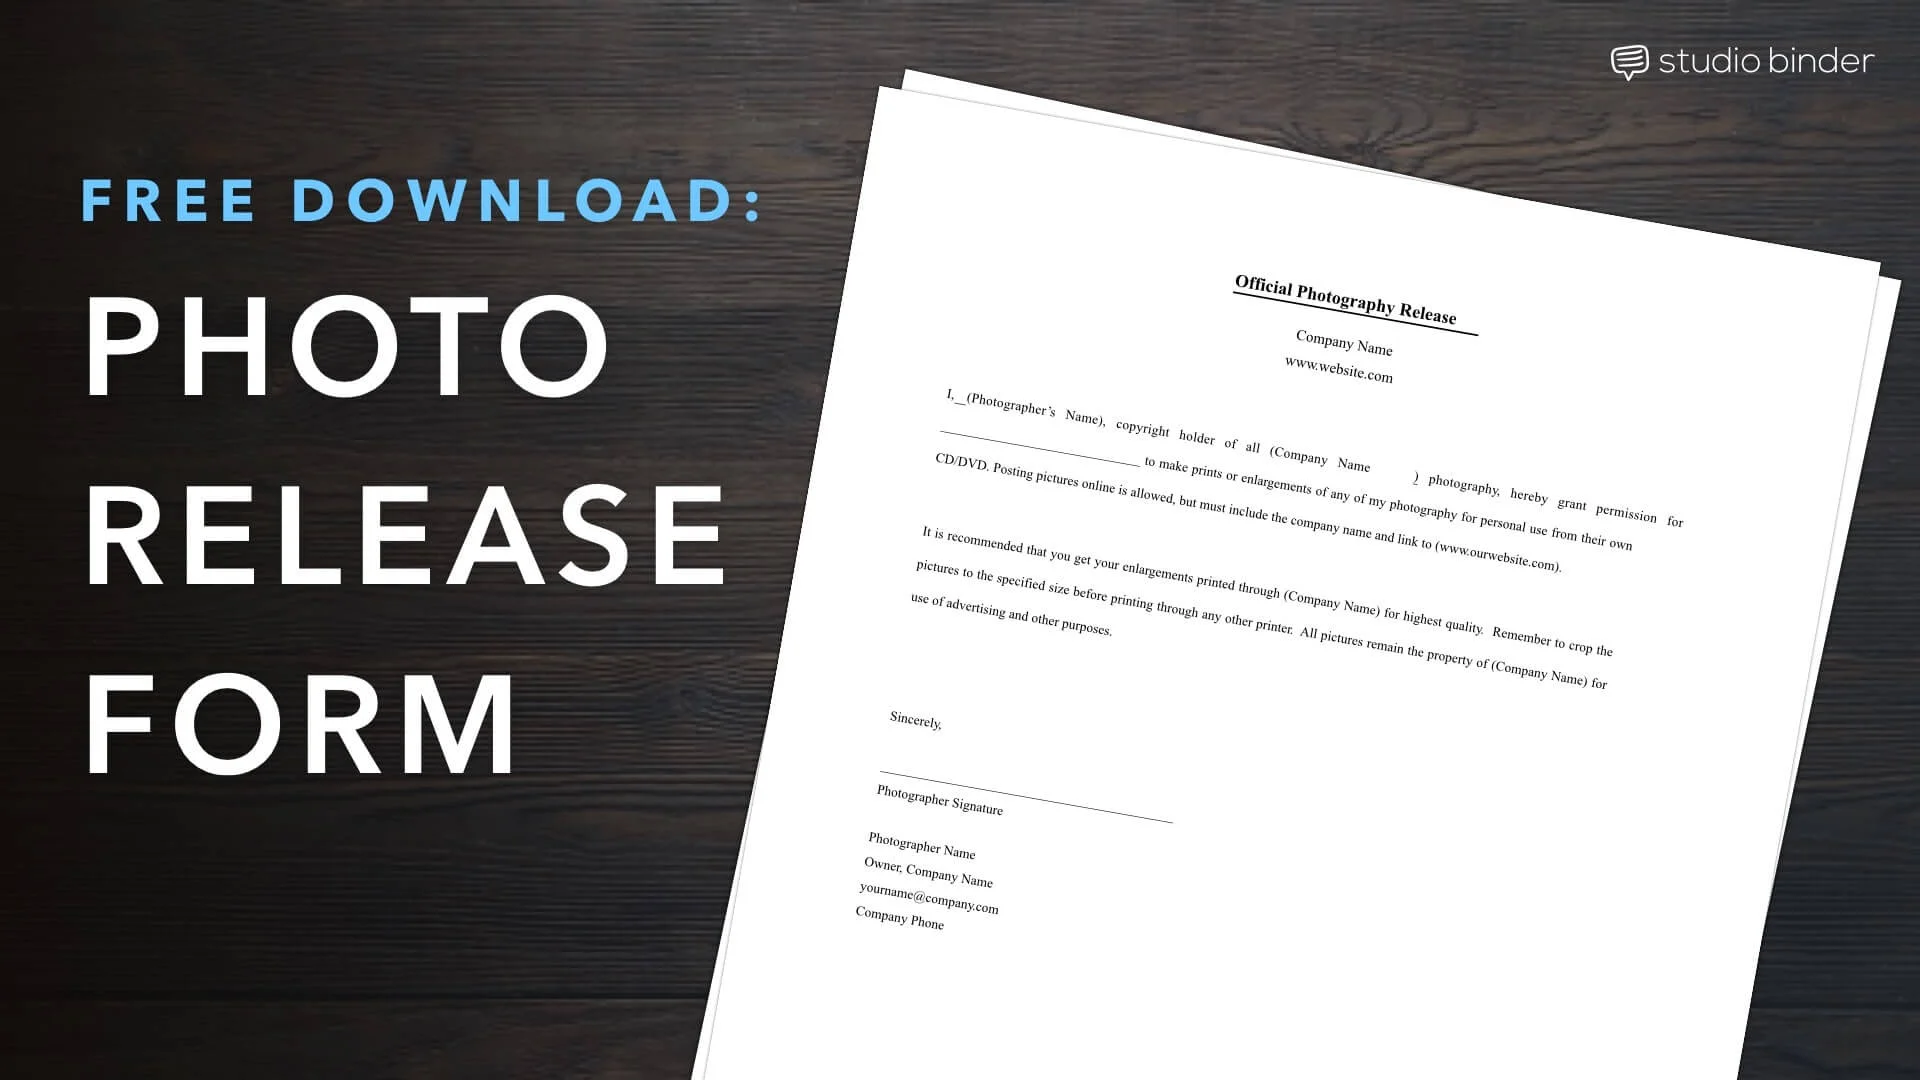 FREE Photo Release Form Template Download PDF - Featured Image - StudioBinder